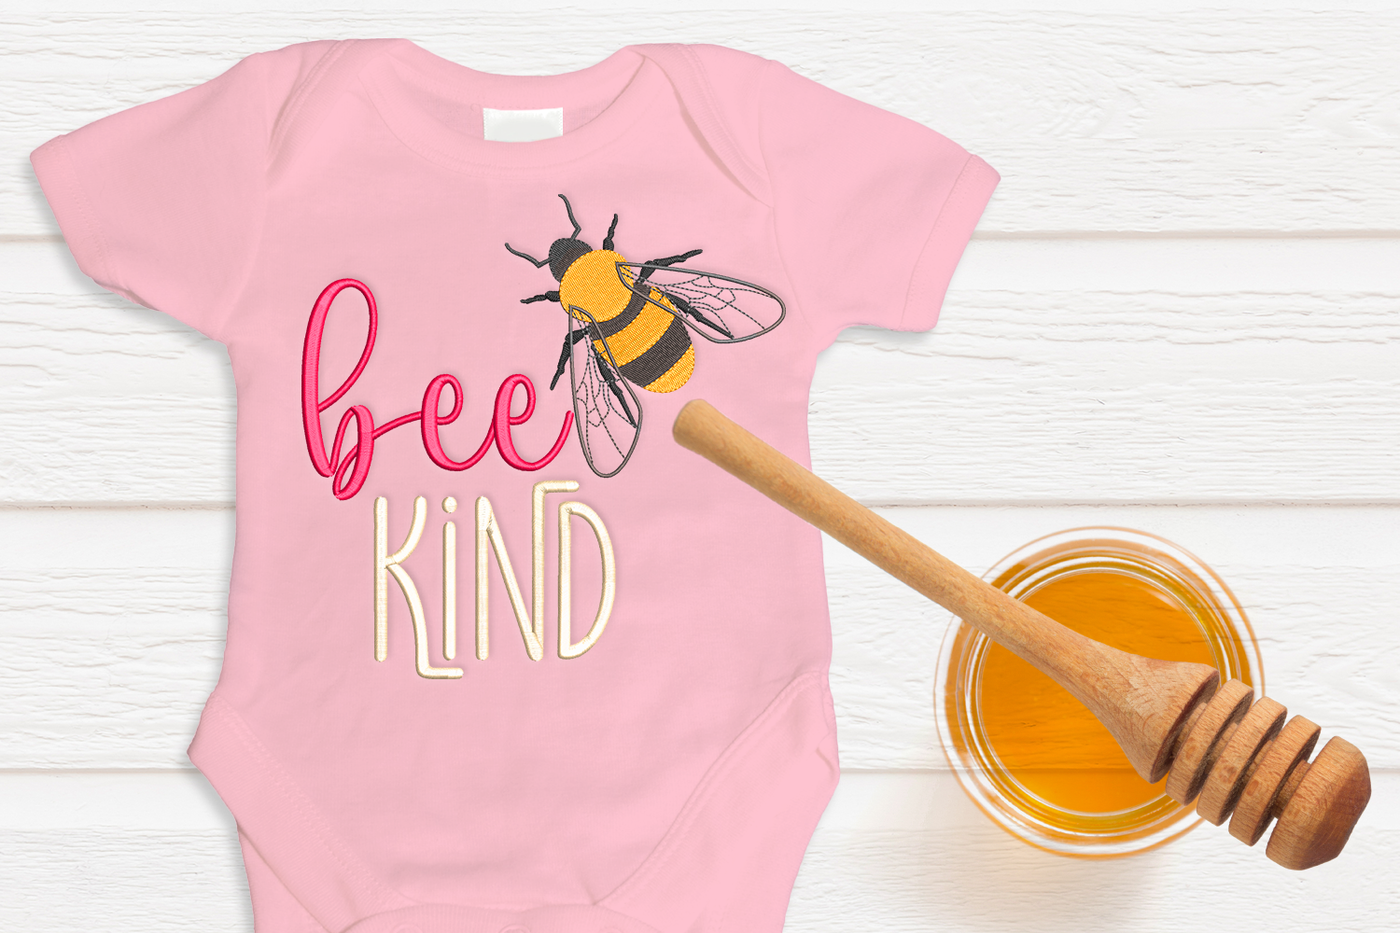 bee kind with realistic bee embroidery design